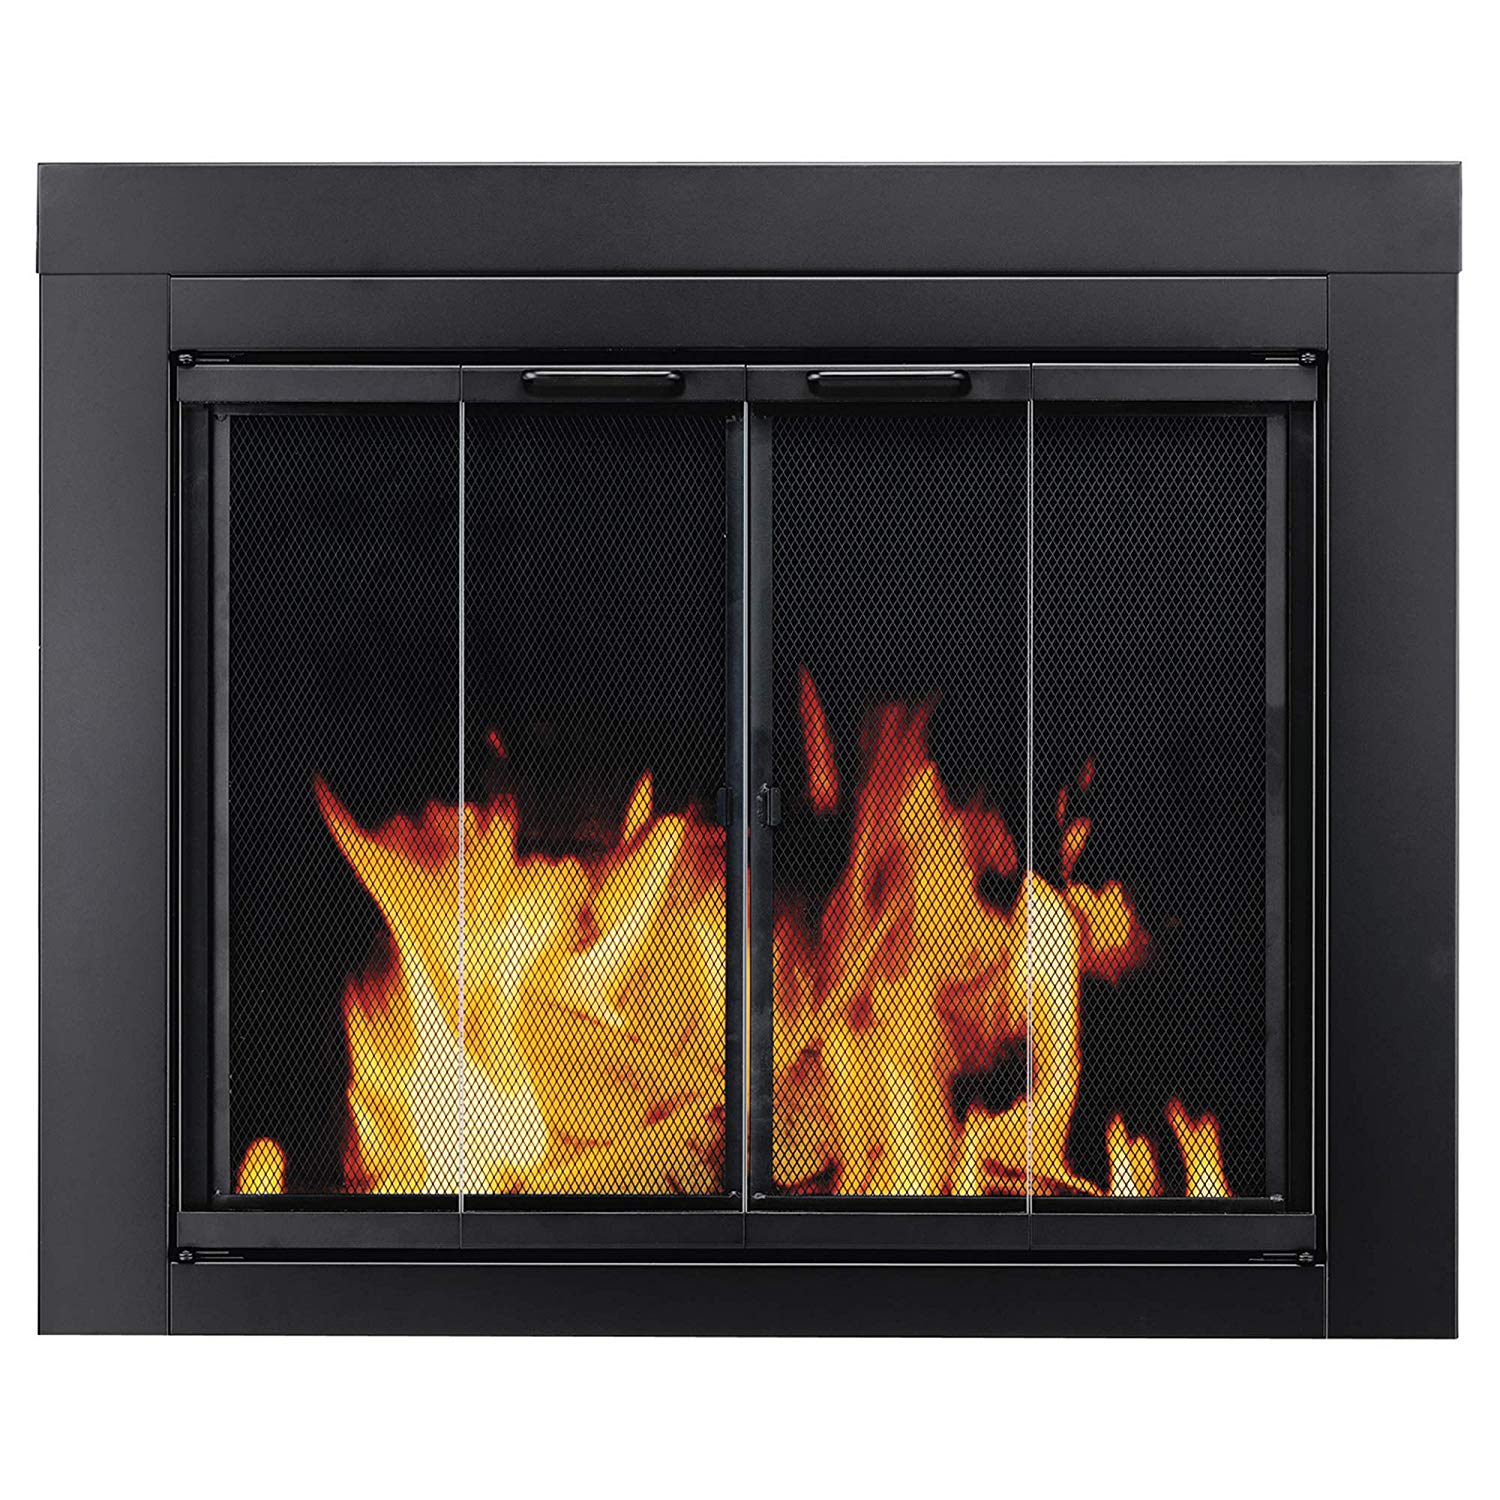 Discount Fireplaces Inspirational Pleasant Hearth at 1000 ascot Fireplace Glass Door Black Small